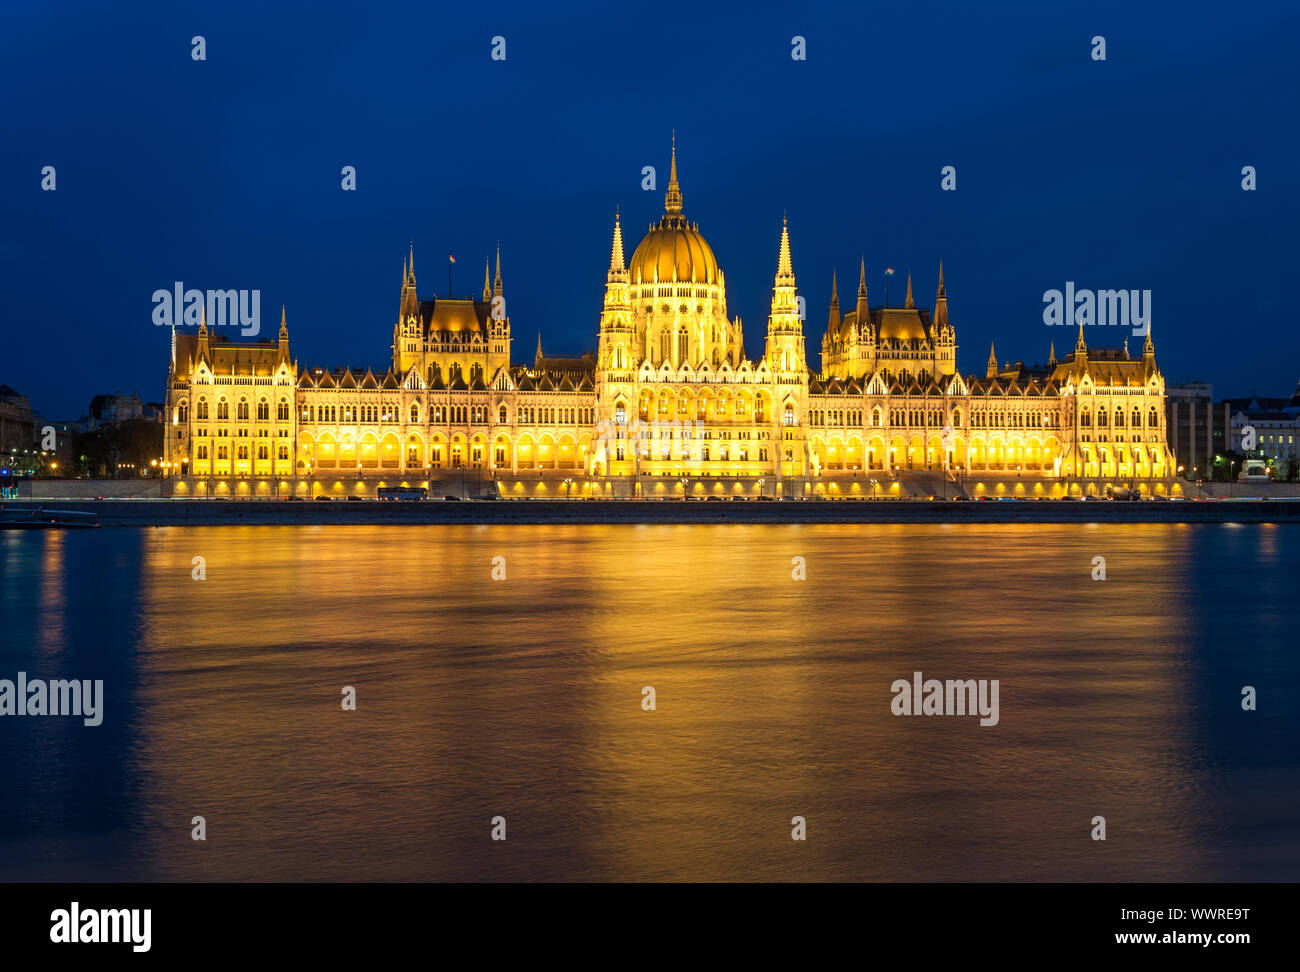 Parliament building and the Danube river at night, Budapest, Hungary Stock Photo